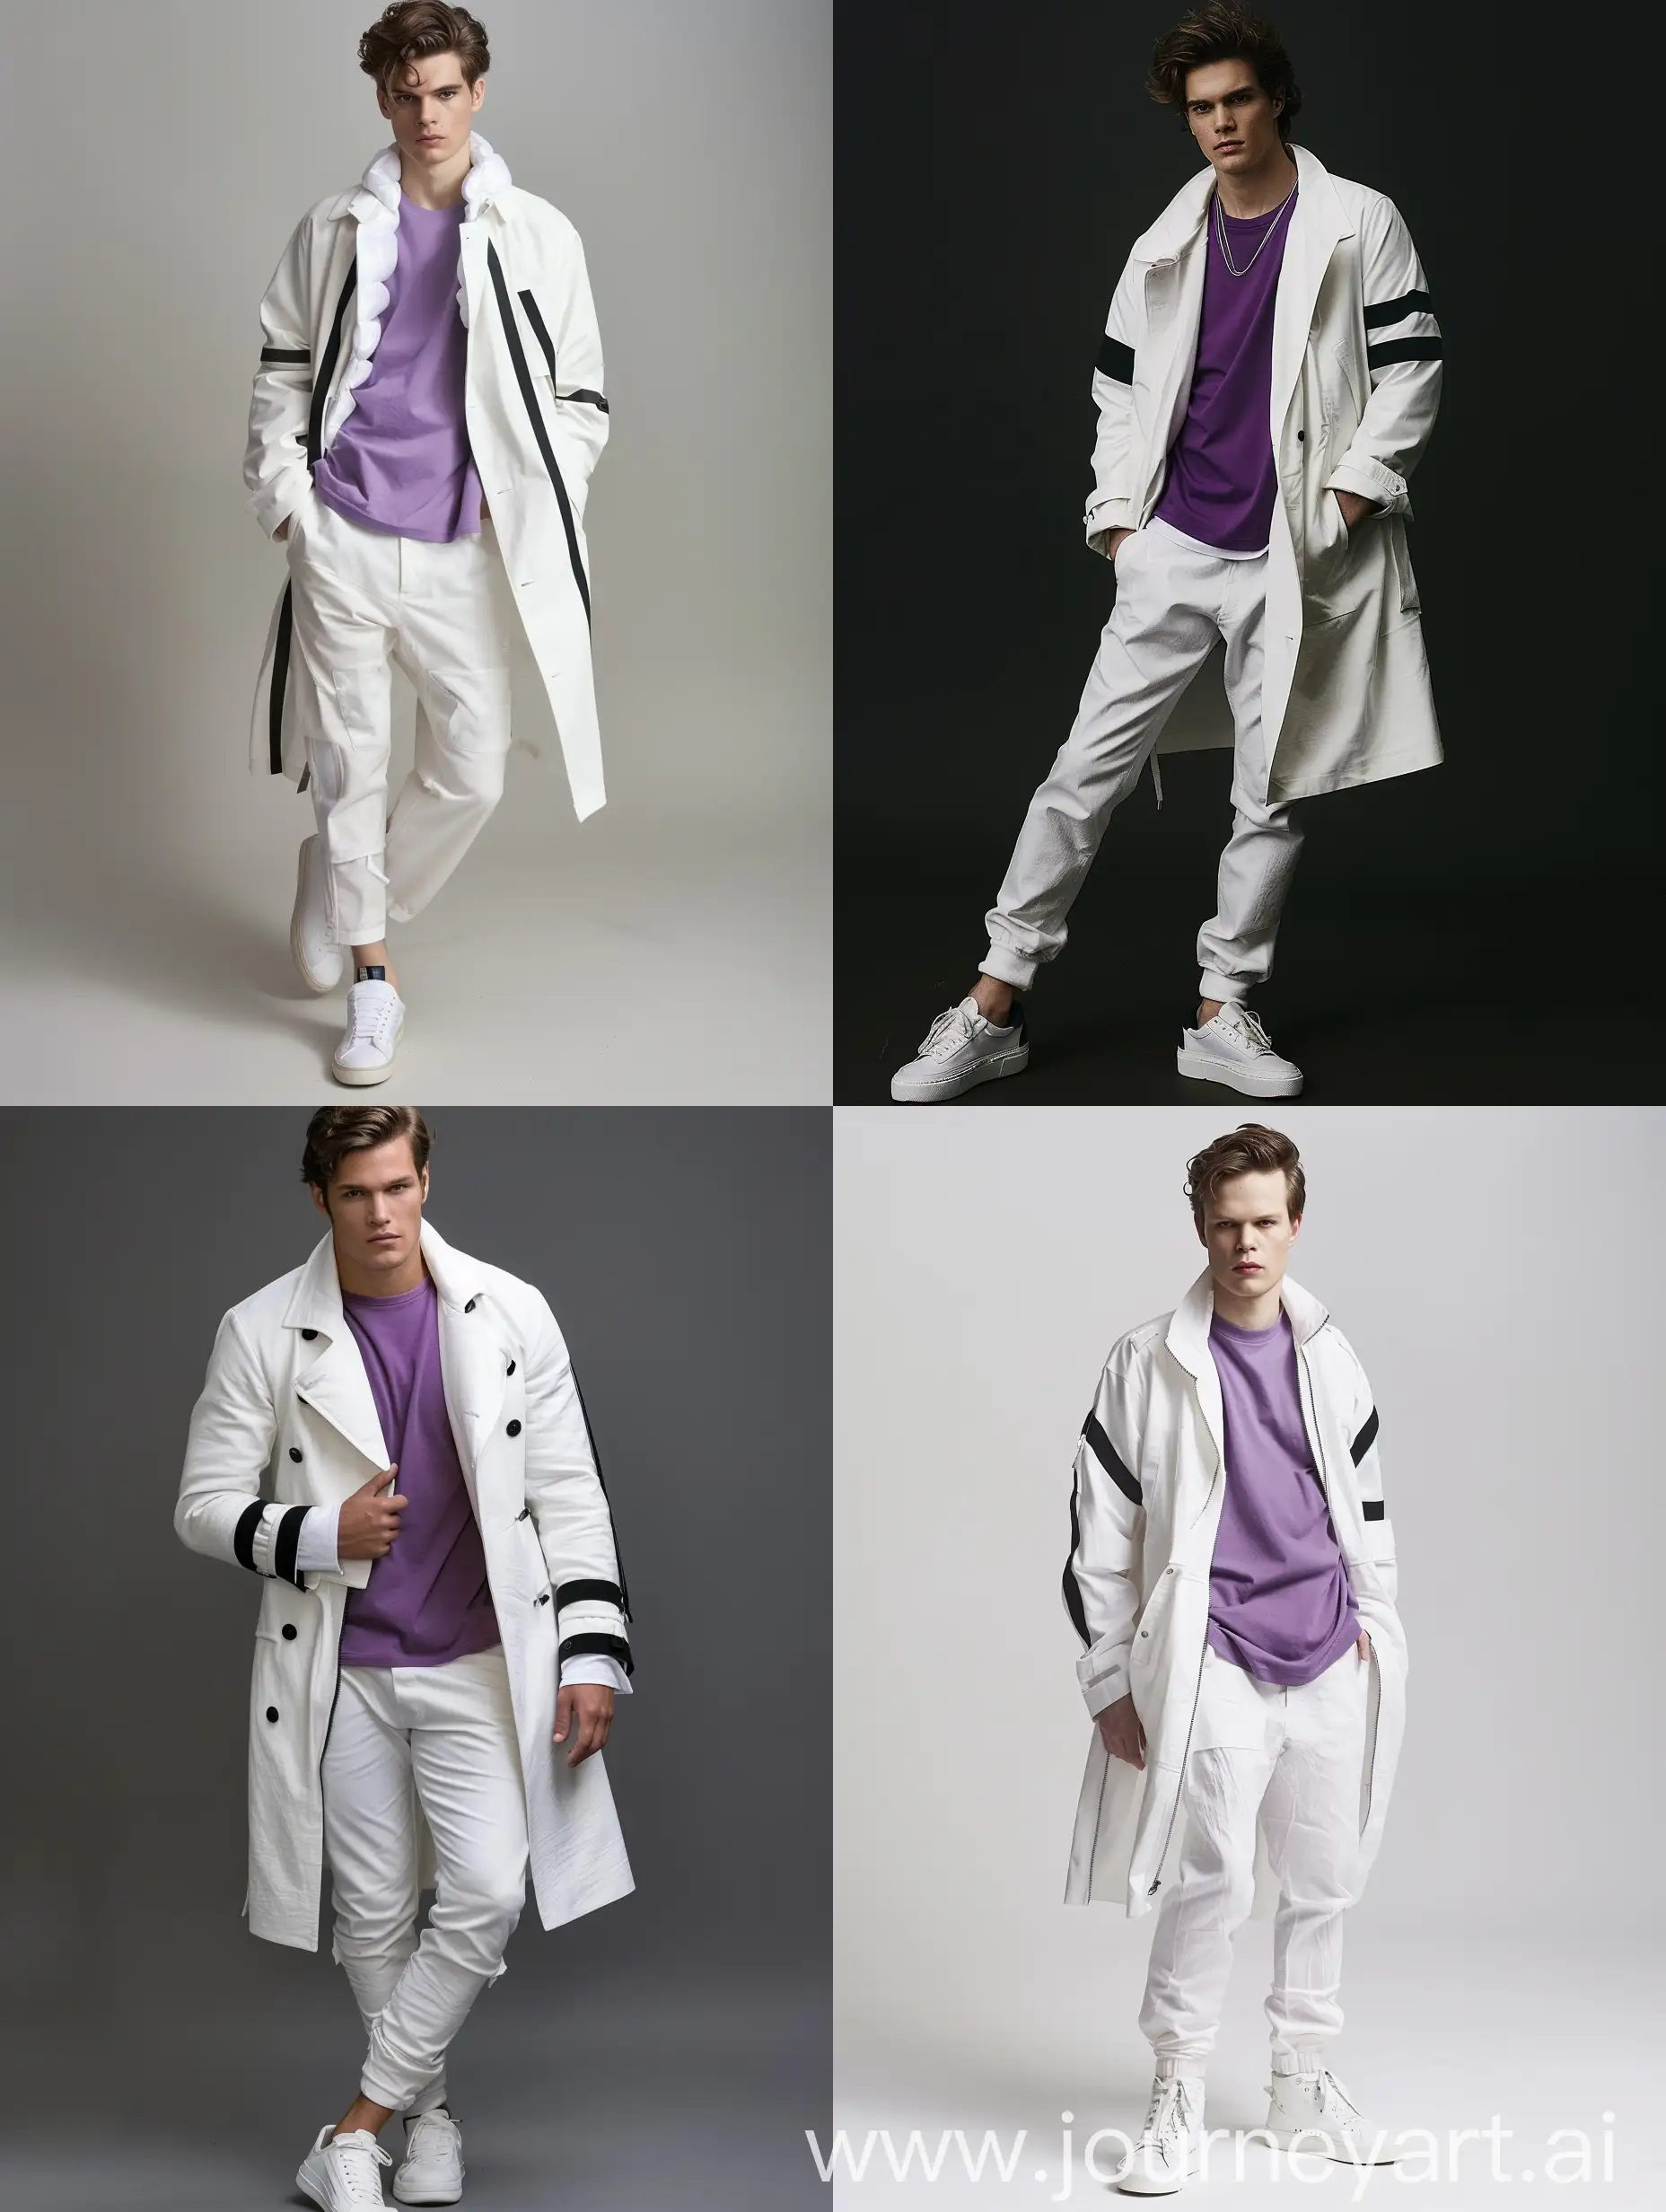 Fashionable-Man-in-Striped-White-Coat-and-Purple-TShirt